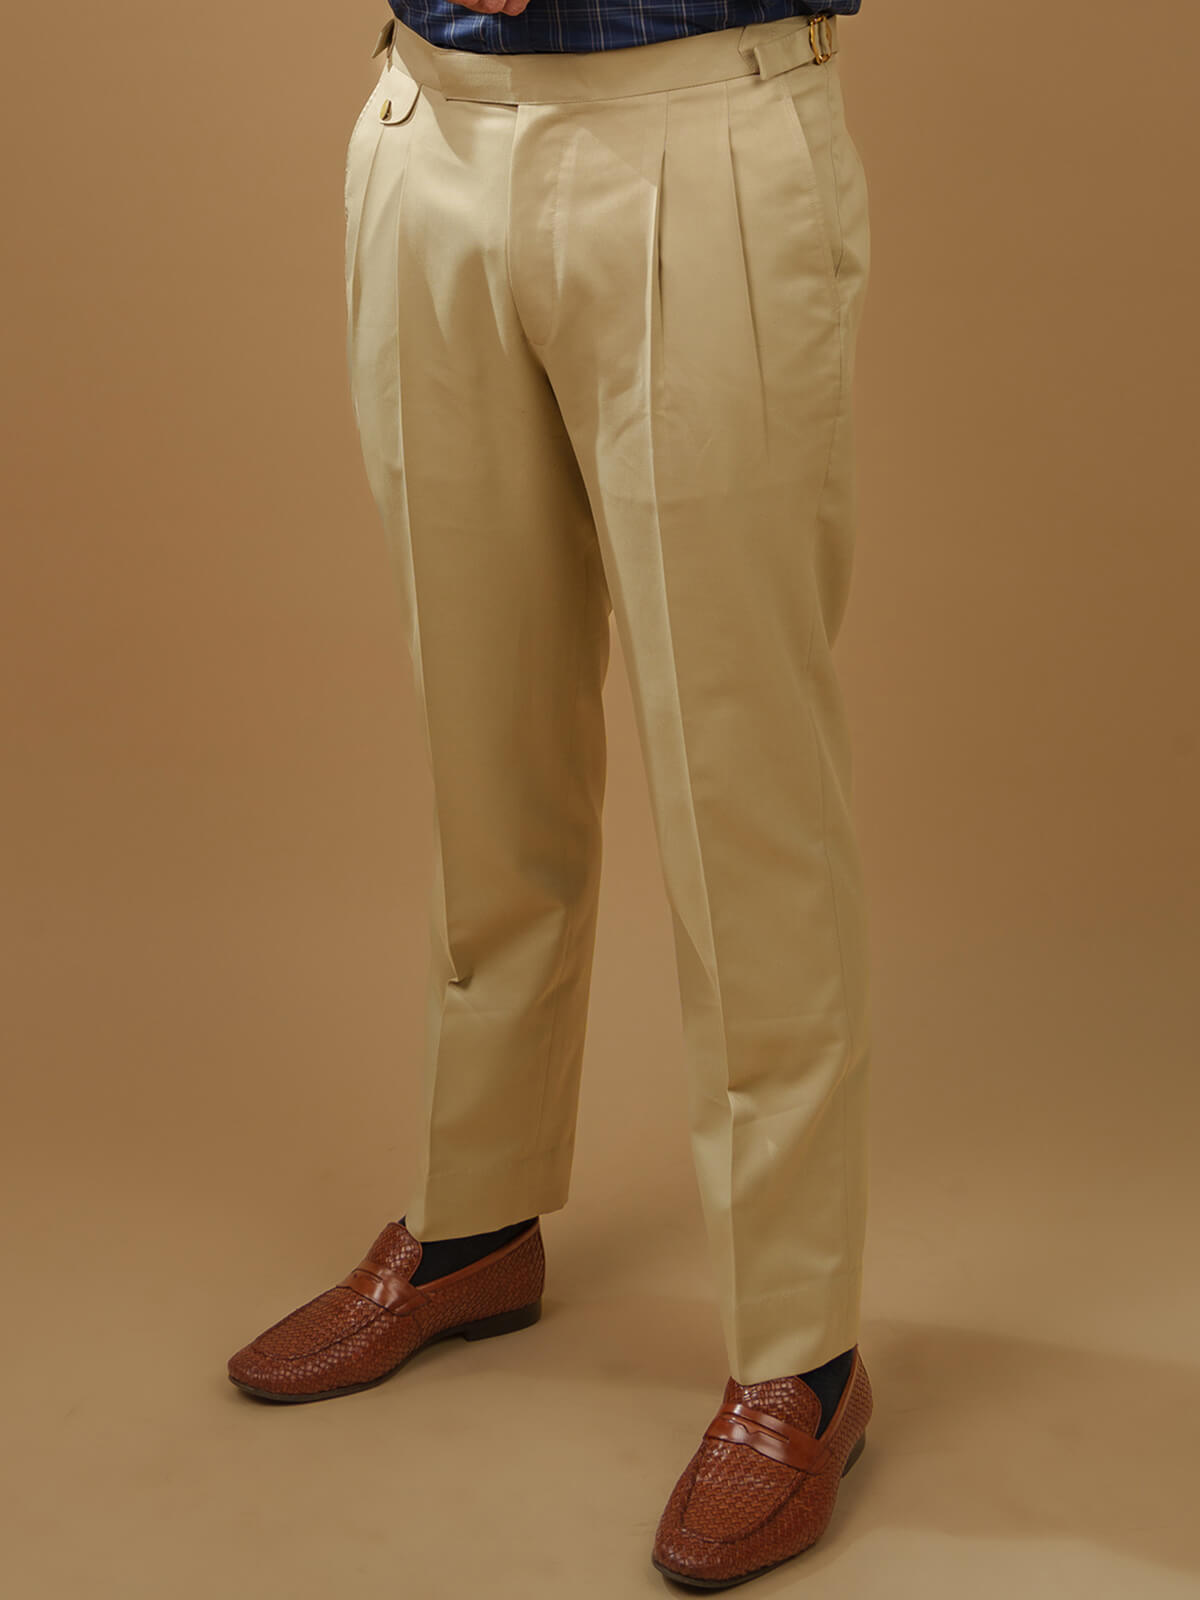 All Essential Camel Pants